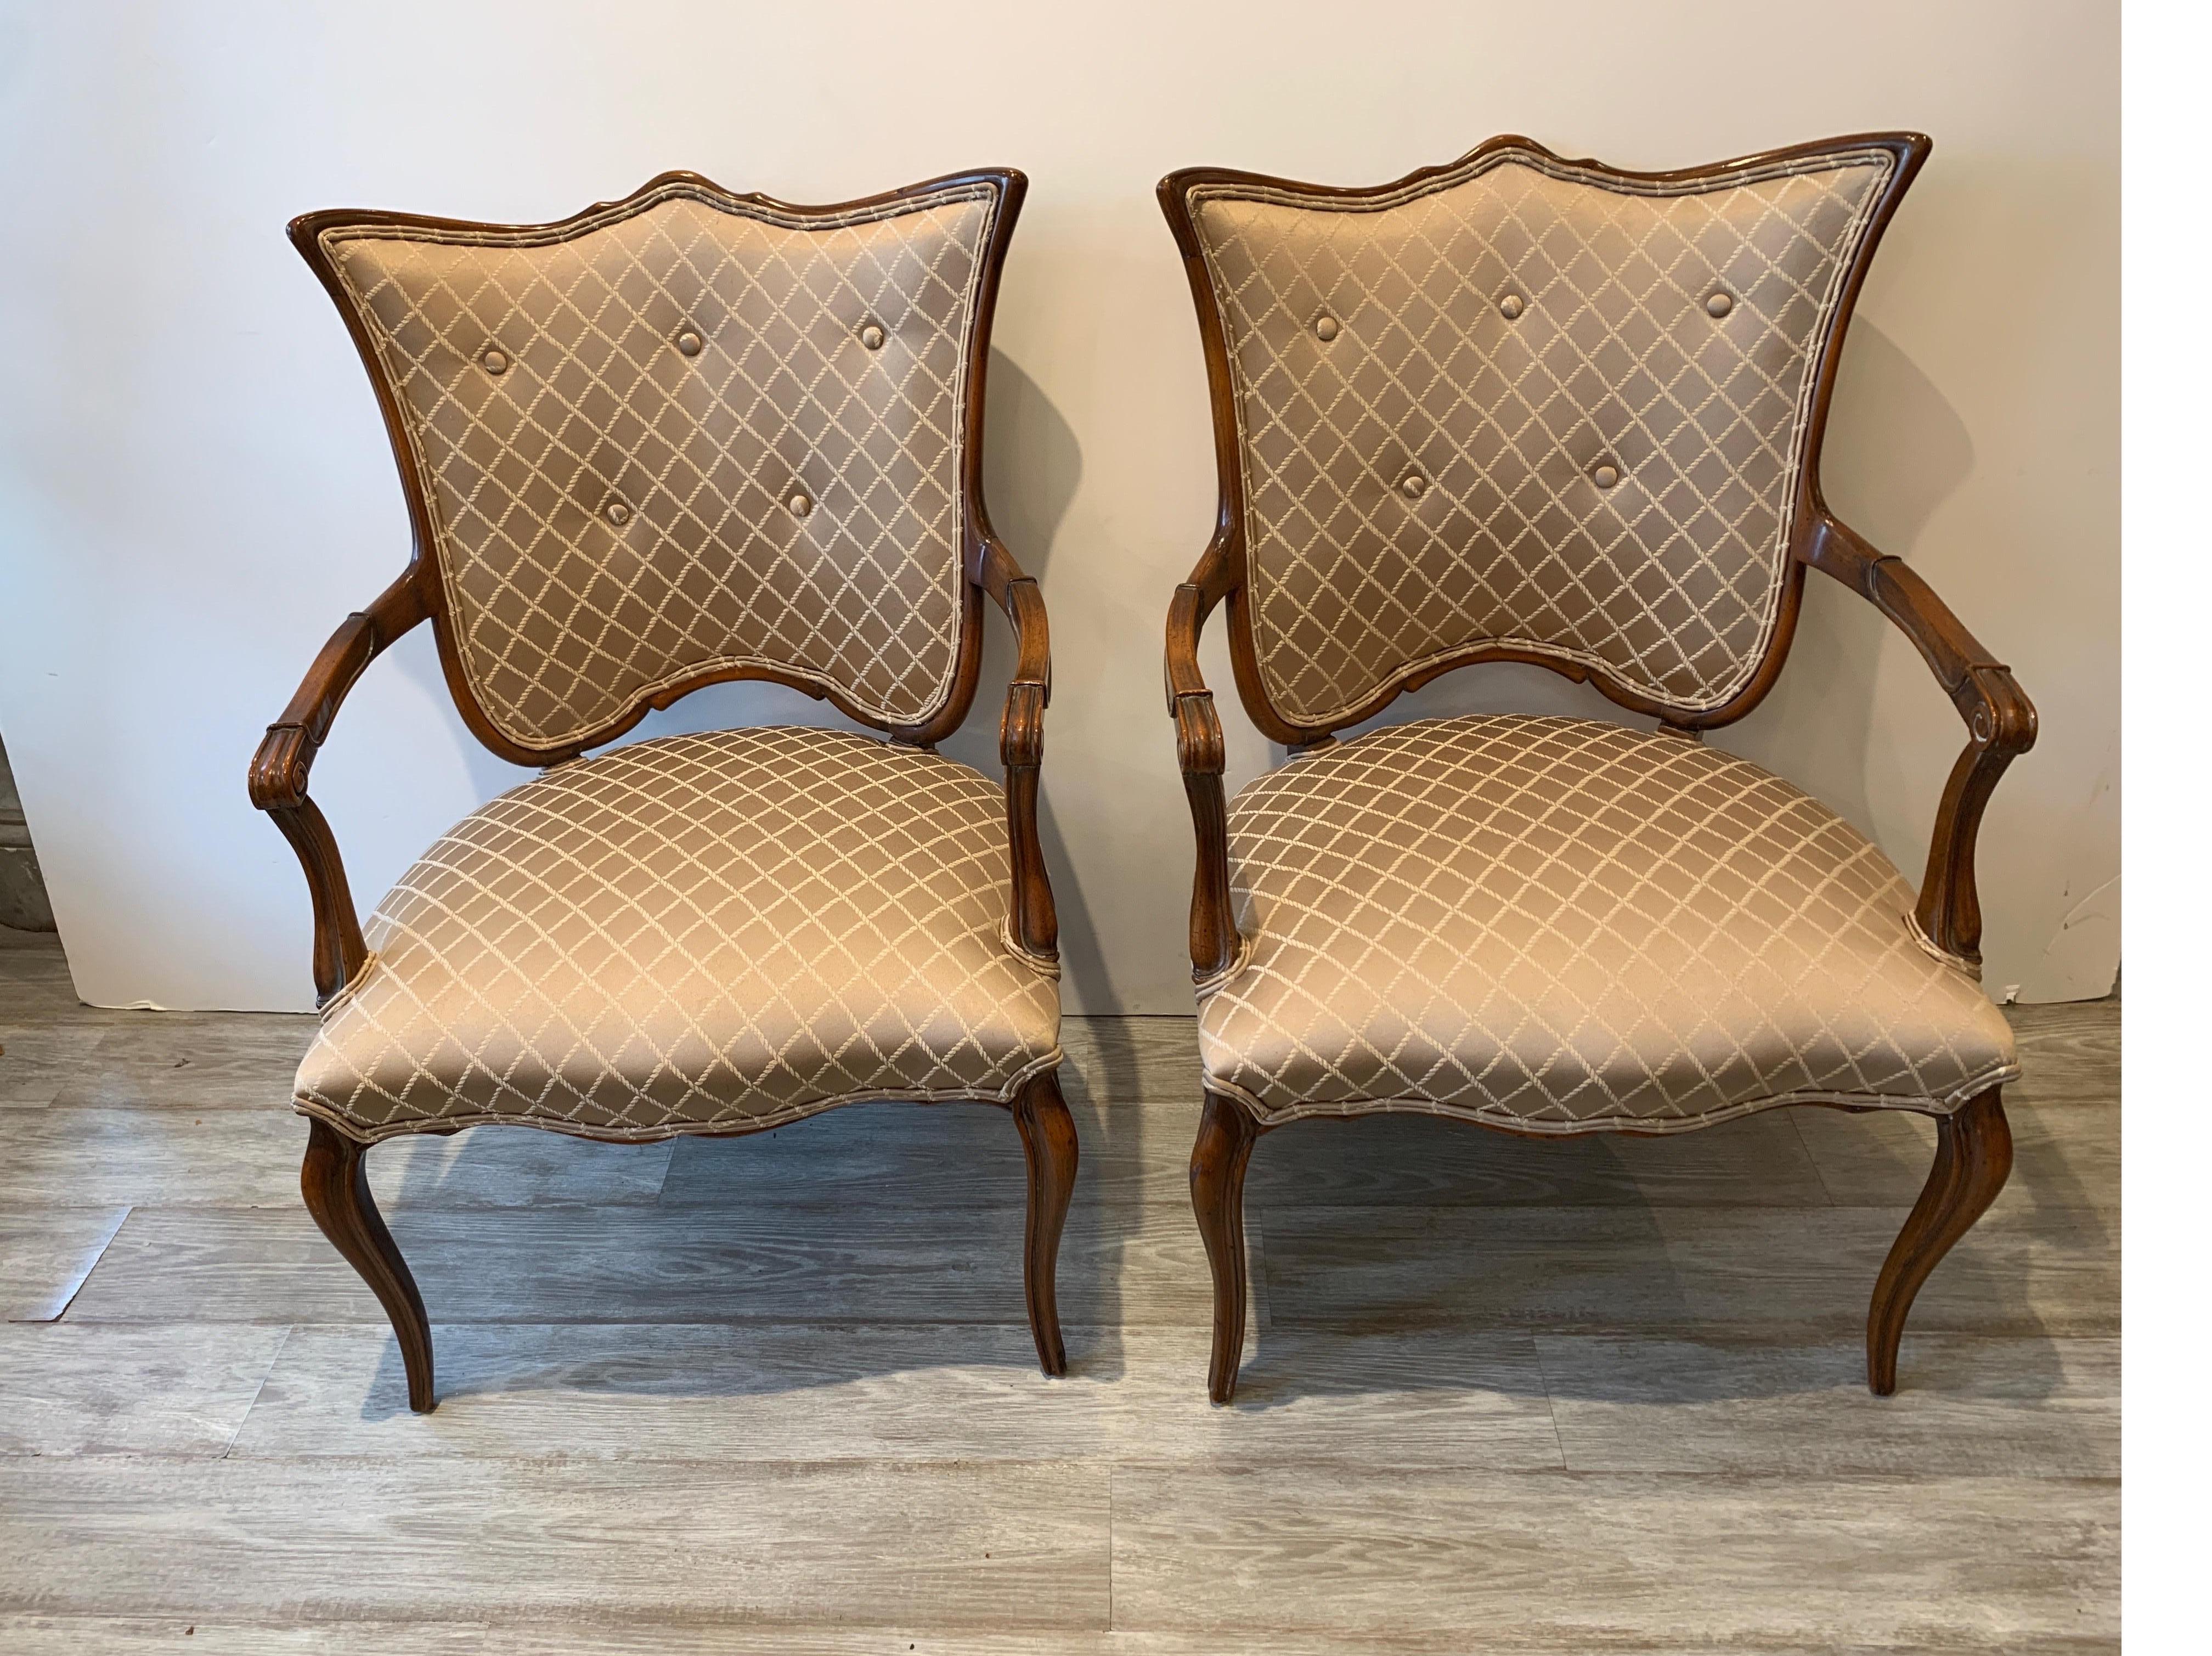 A shapely pair of fruitwood armchairs with open arms. The shield fanned backs with attached seats in a newly upholstered lattice pattern damask fabric.